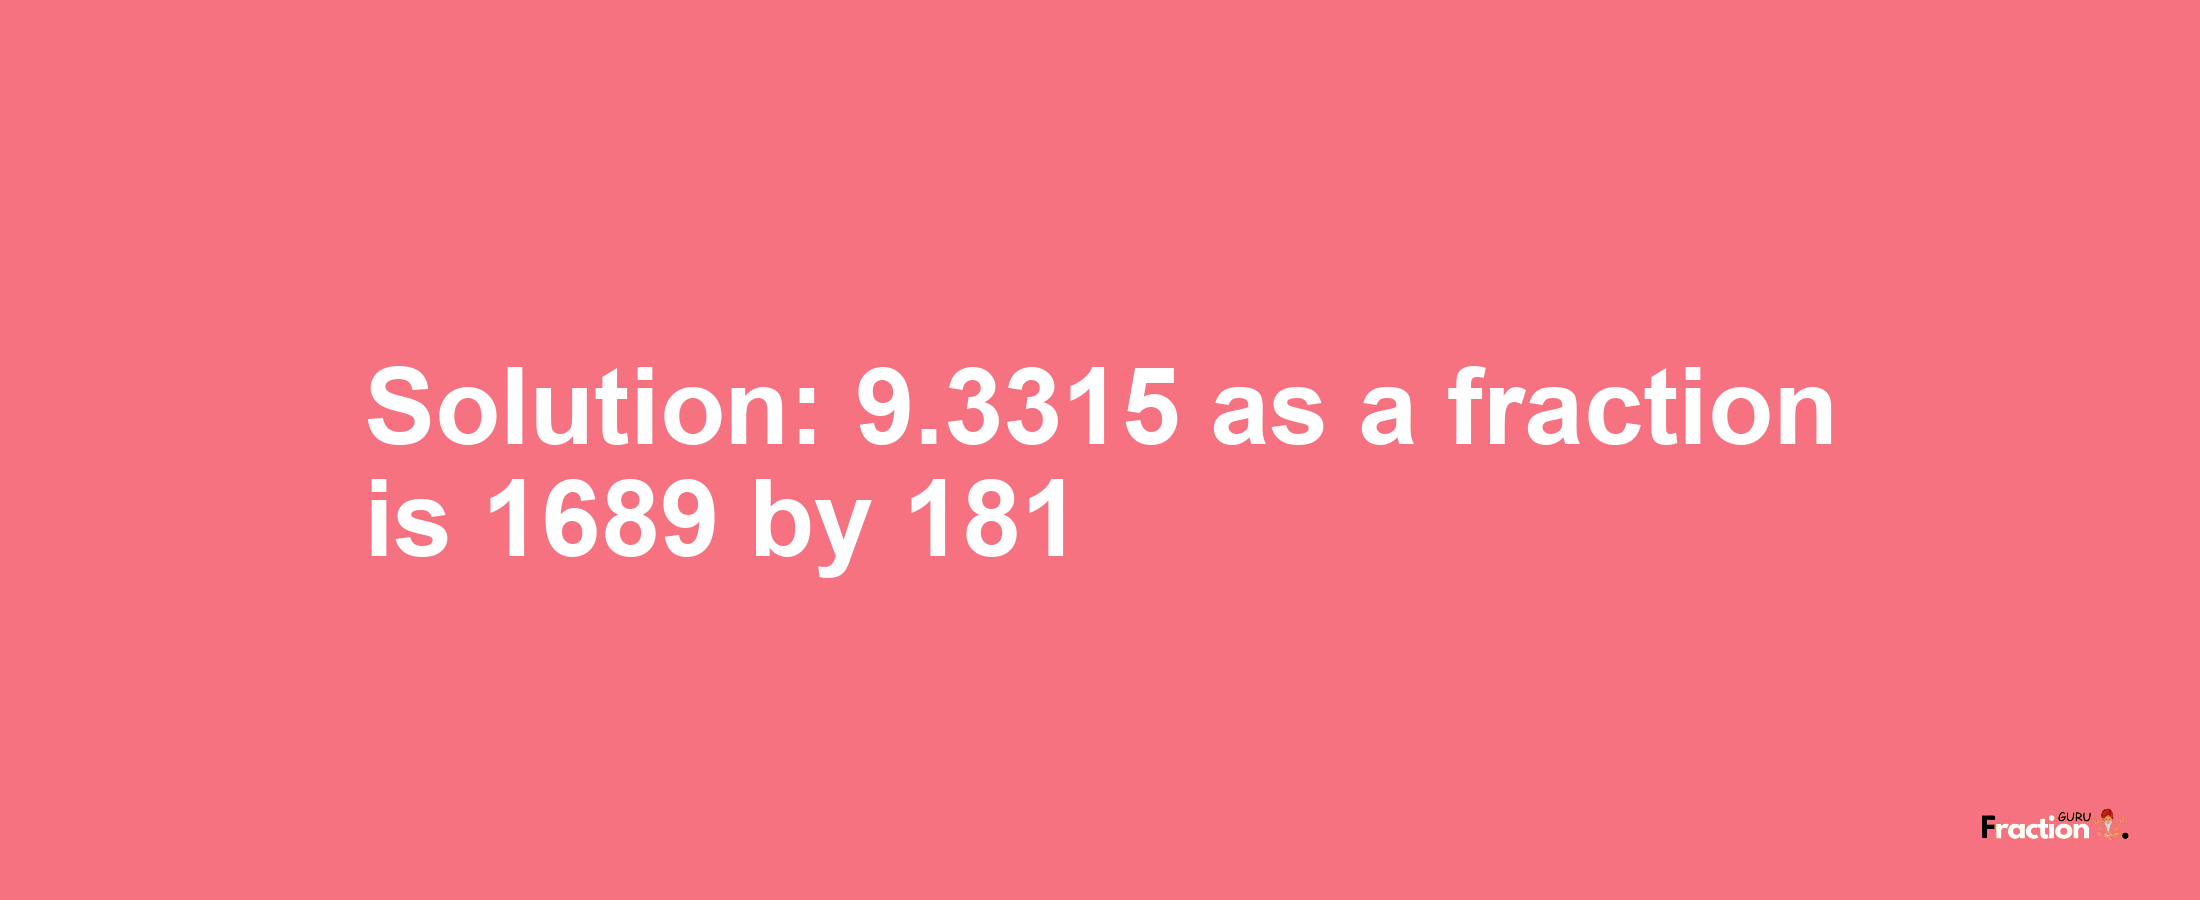 Solution:9.3315 as a fraction is 1689/181